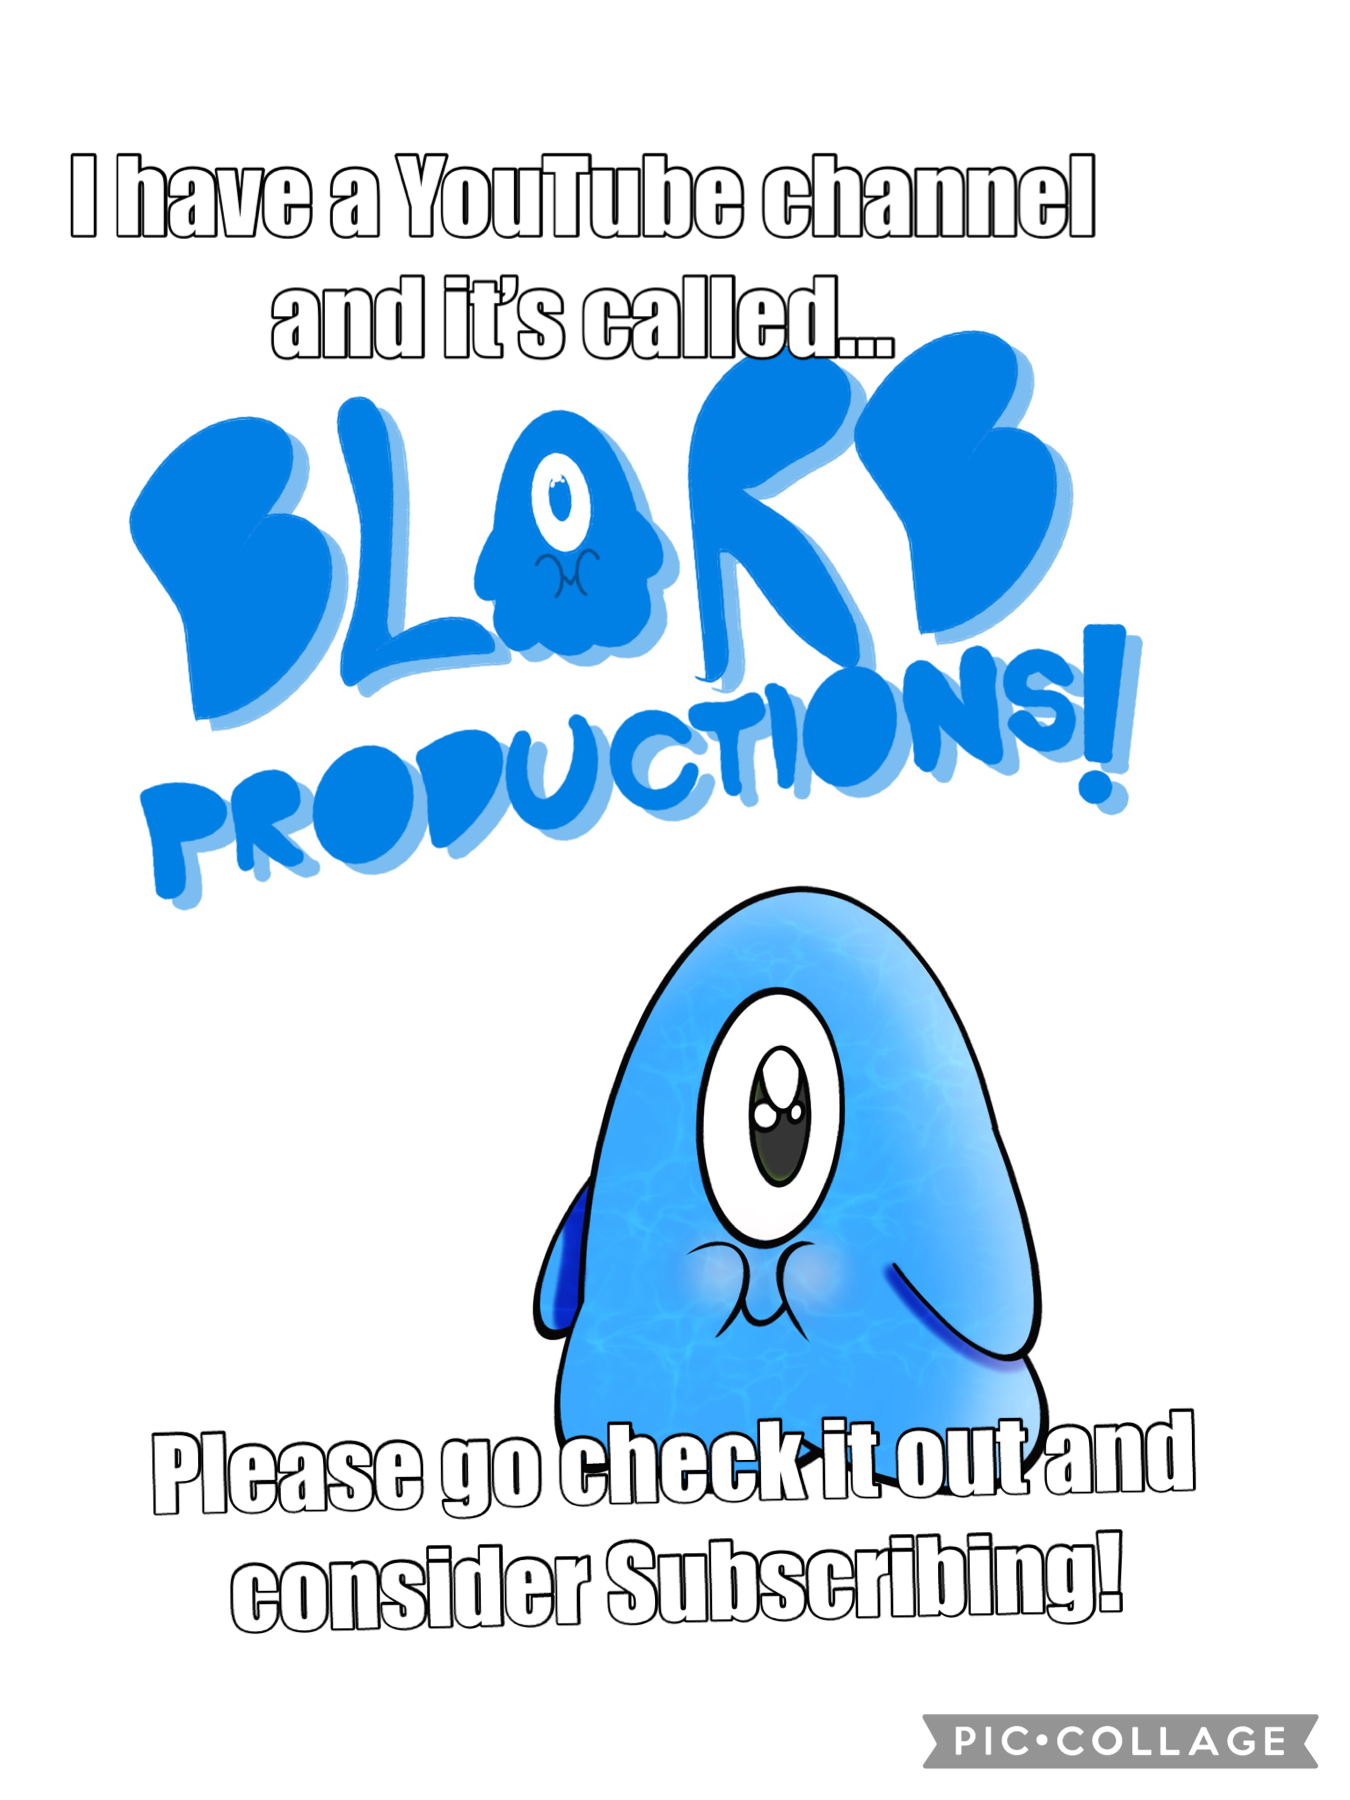 Blorb Productions!